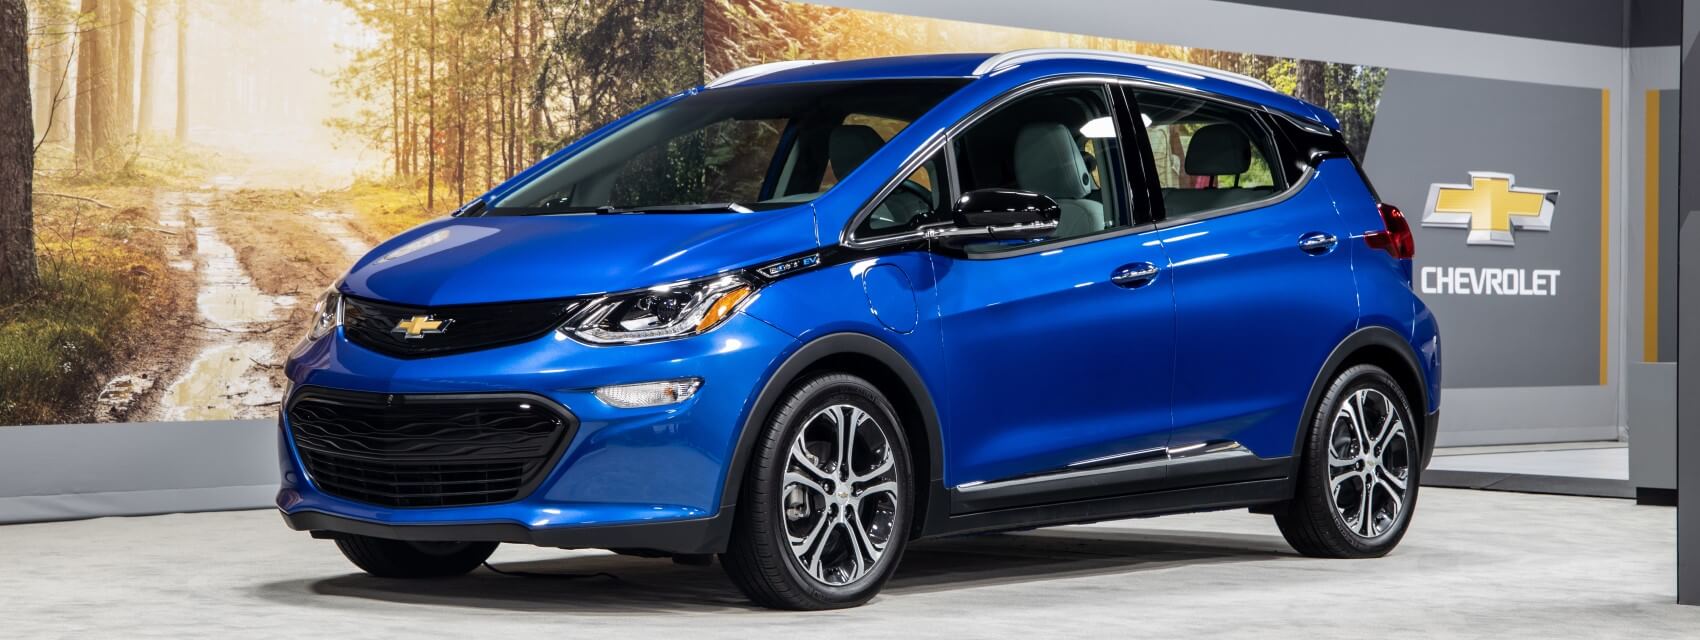 Chevy Bolt Lease Deals Whitehall OH